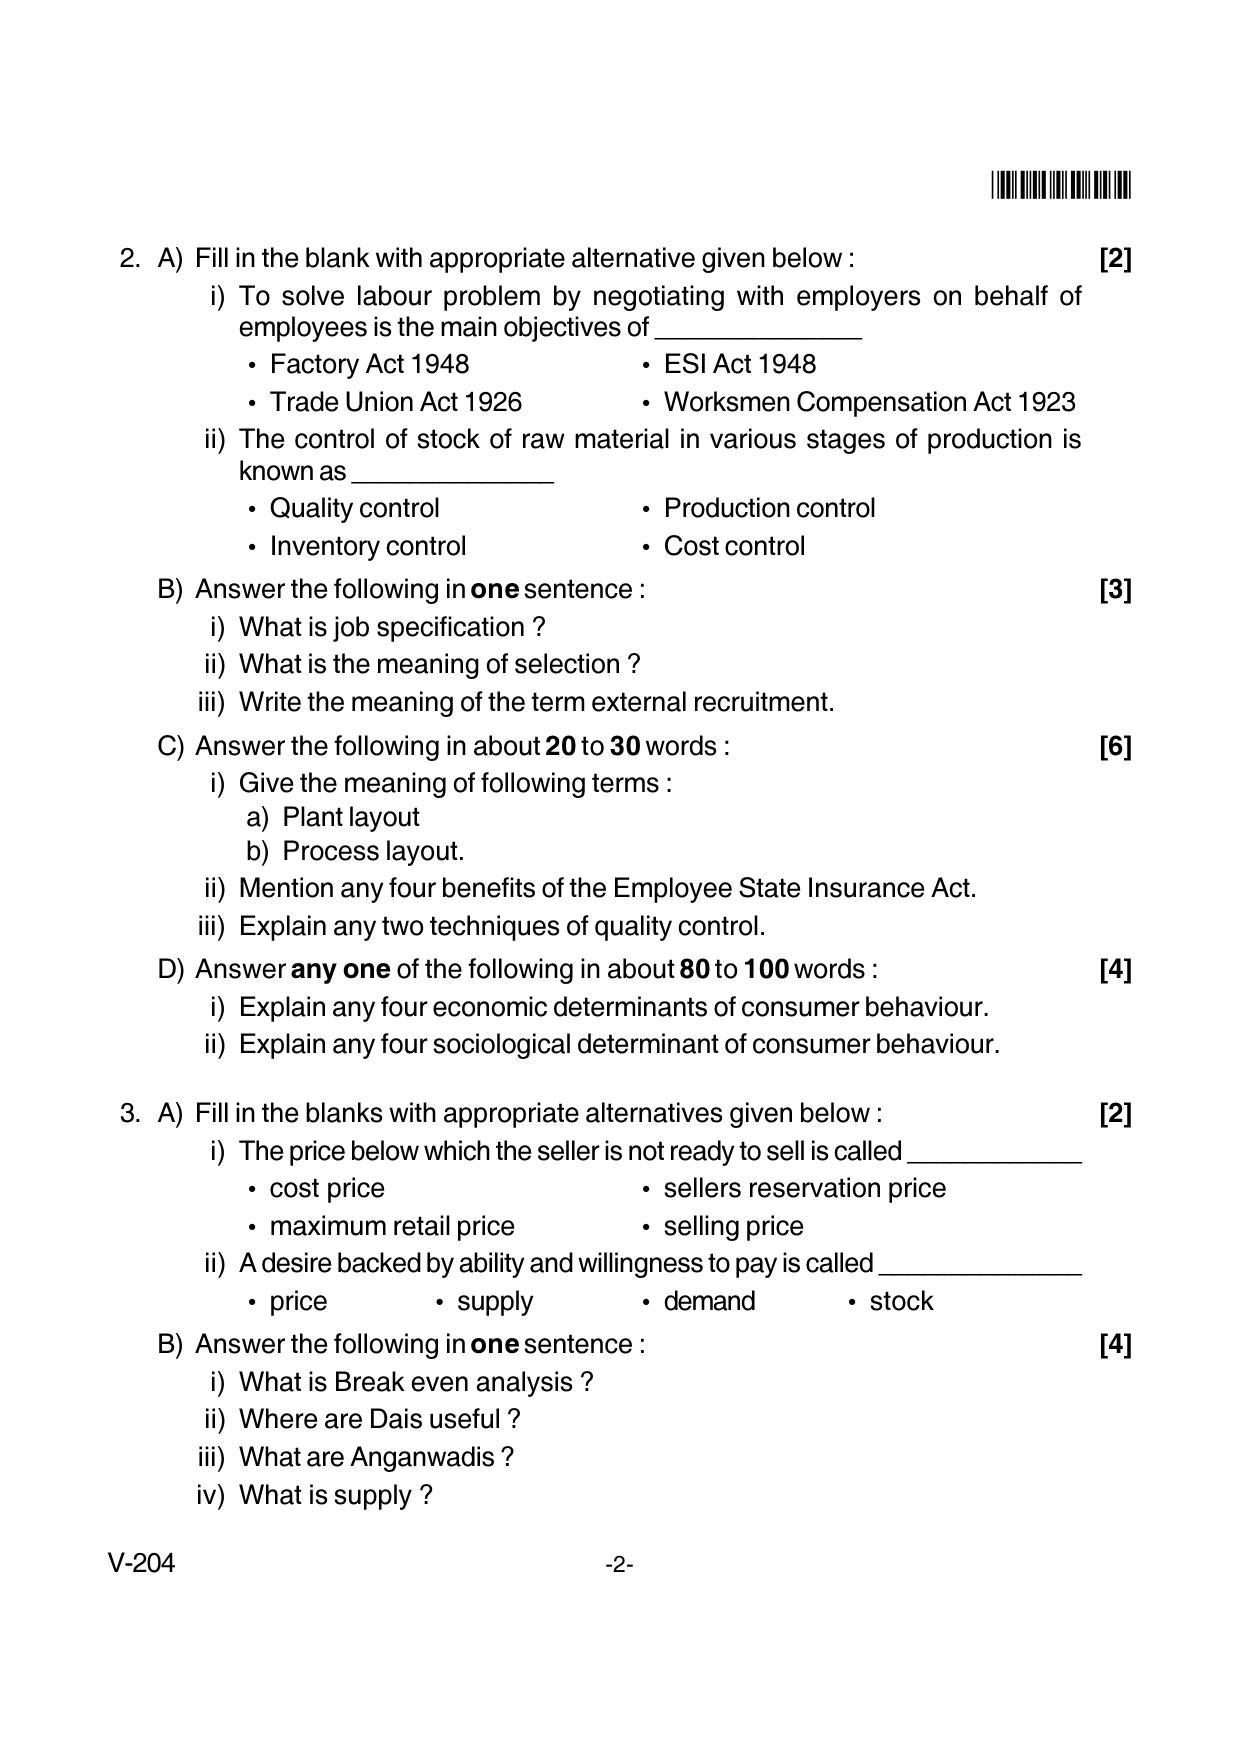 Goa Board Class 12 General Foundation Course (CWSN)  Voc 204 Cwsn (1) (March 2018) Question Paper - Page 2